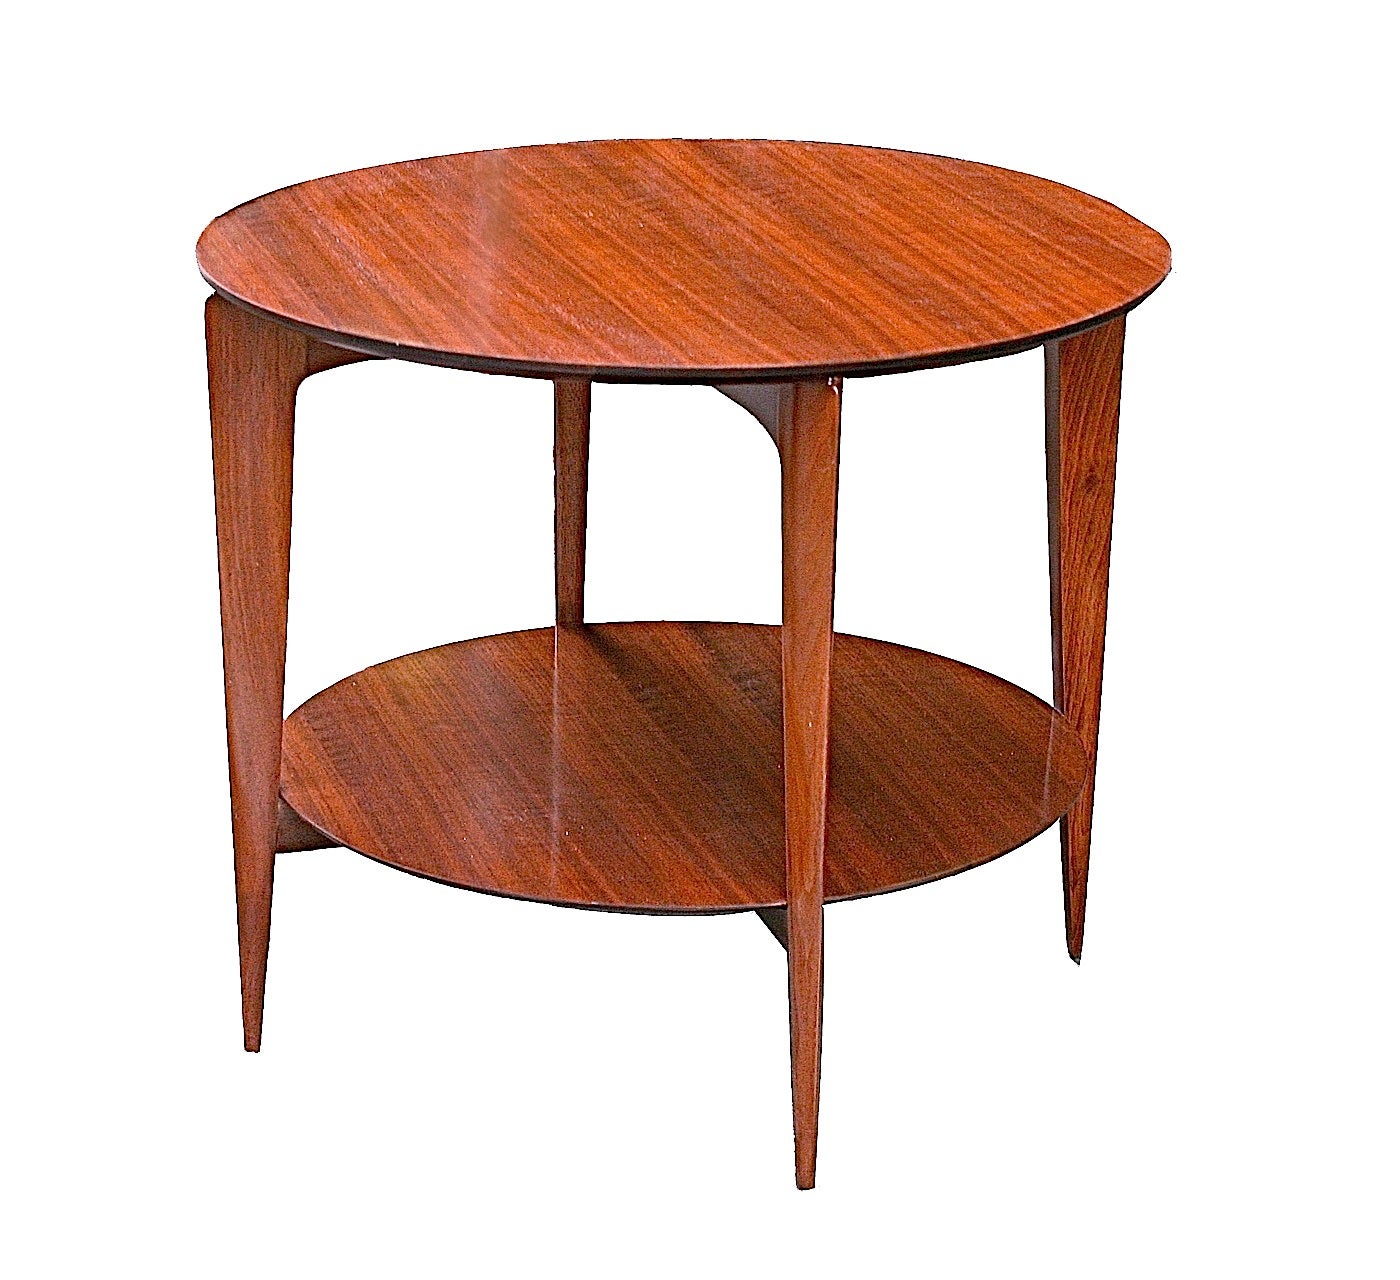 A Round Low Table by Gio Ponti for M. Singer & Sons, IT/USA, c. 1950s